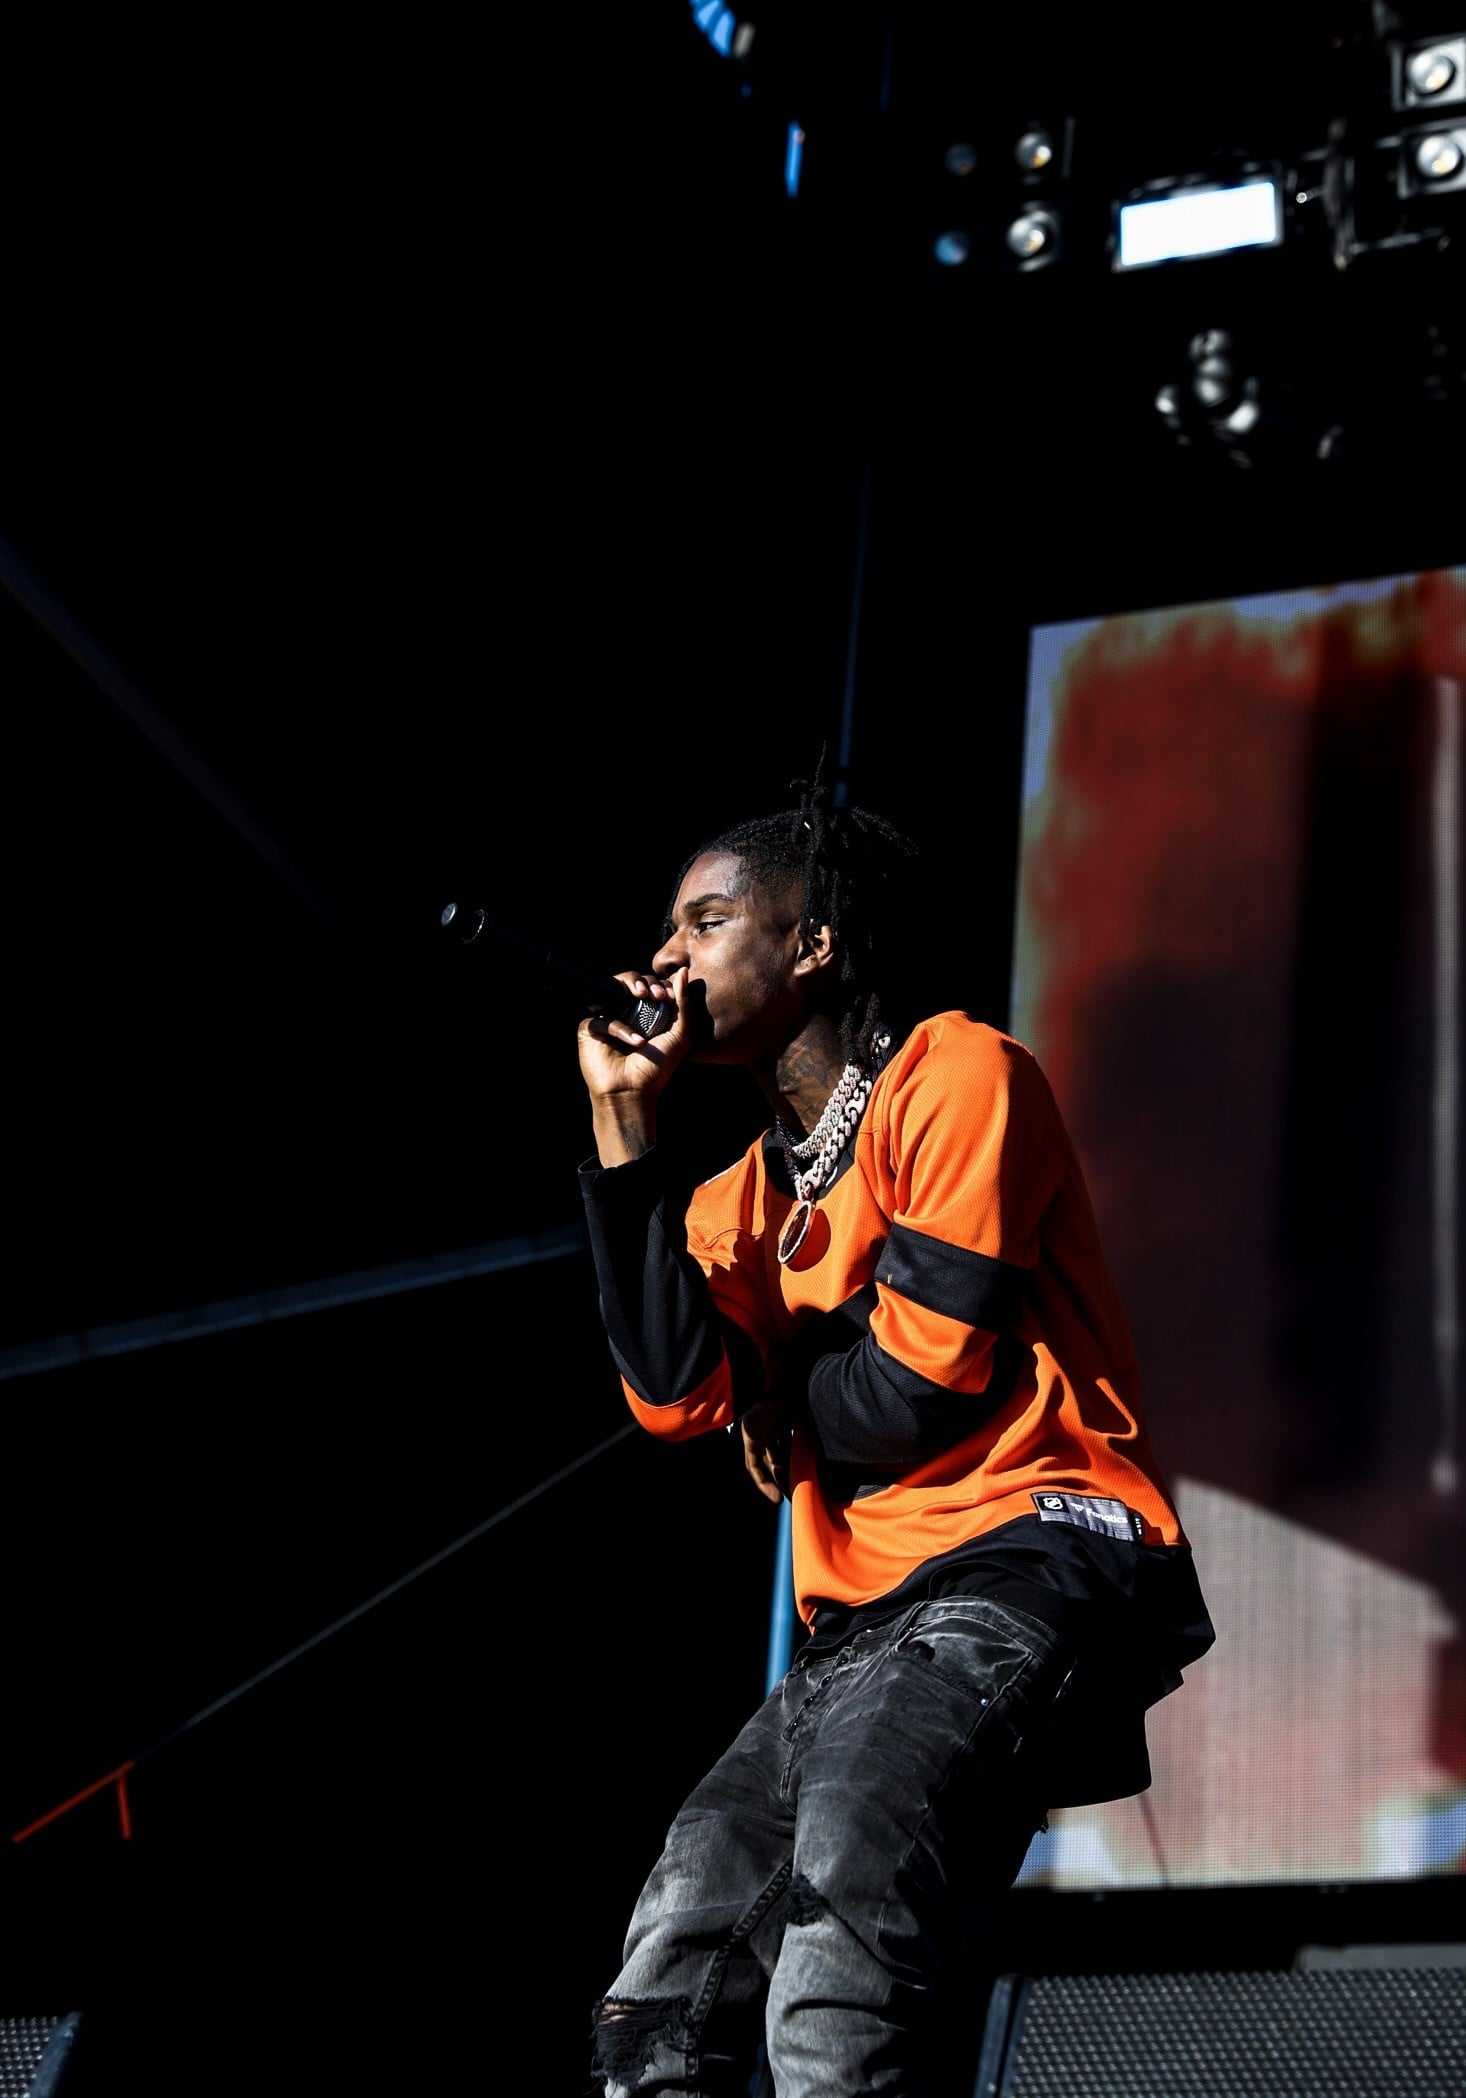 Travis Scott performs at the 2018 Coachella Valley Music and Arts Festival in Indio, California. - Music